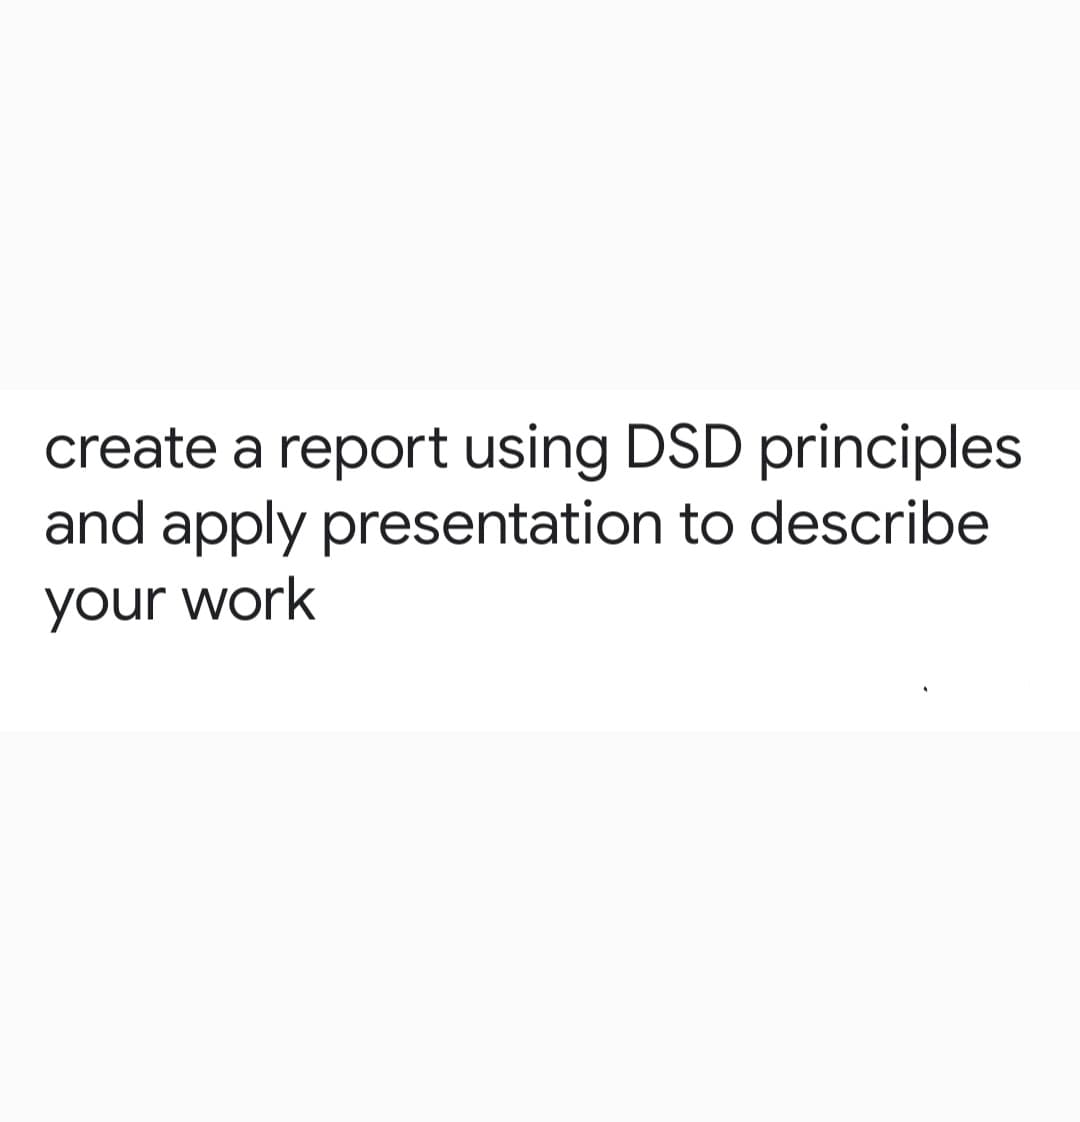 create a report using DSD principles
and apply presentation to describe
your work